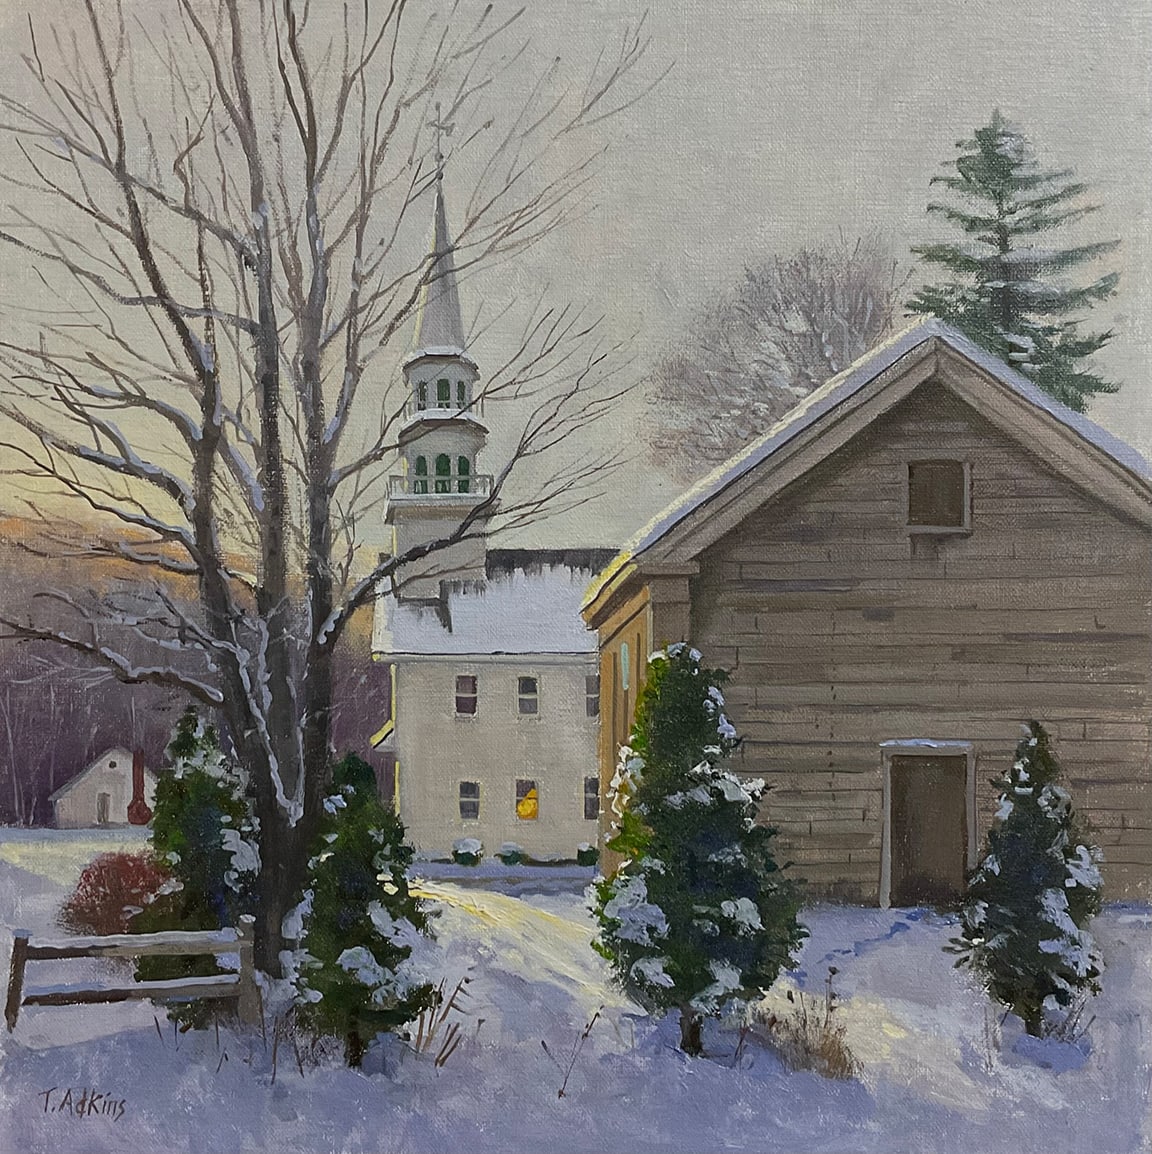 After The Snowfall by Thomas Adkins  Image: After The Snowfall oil on linen 12x12